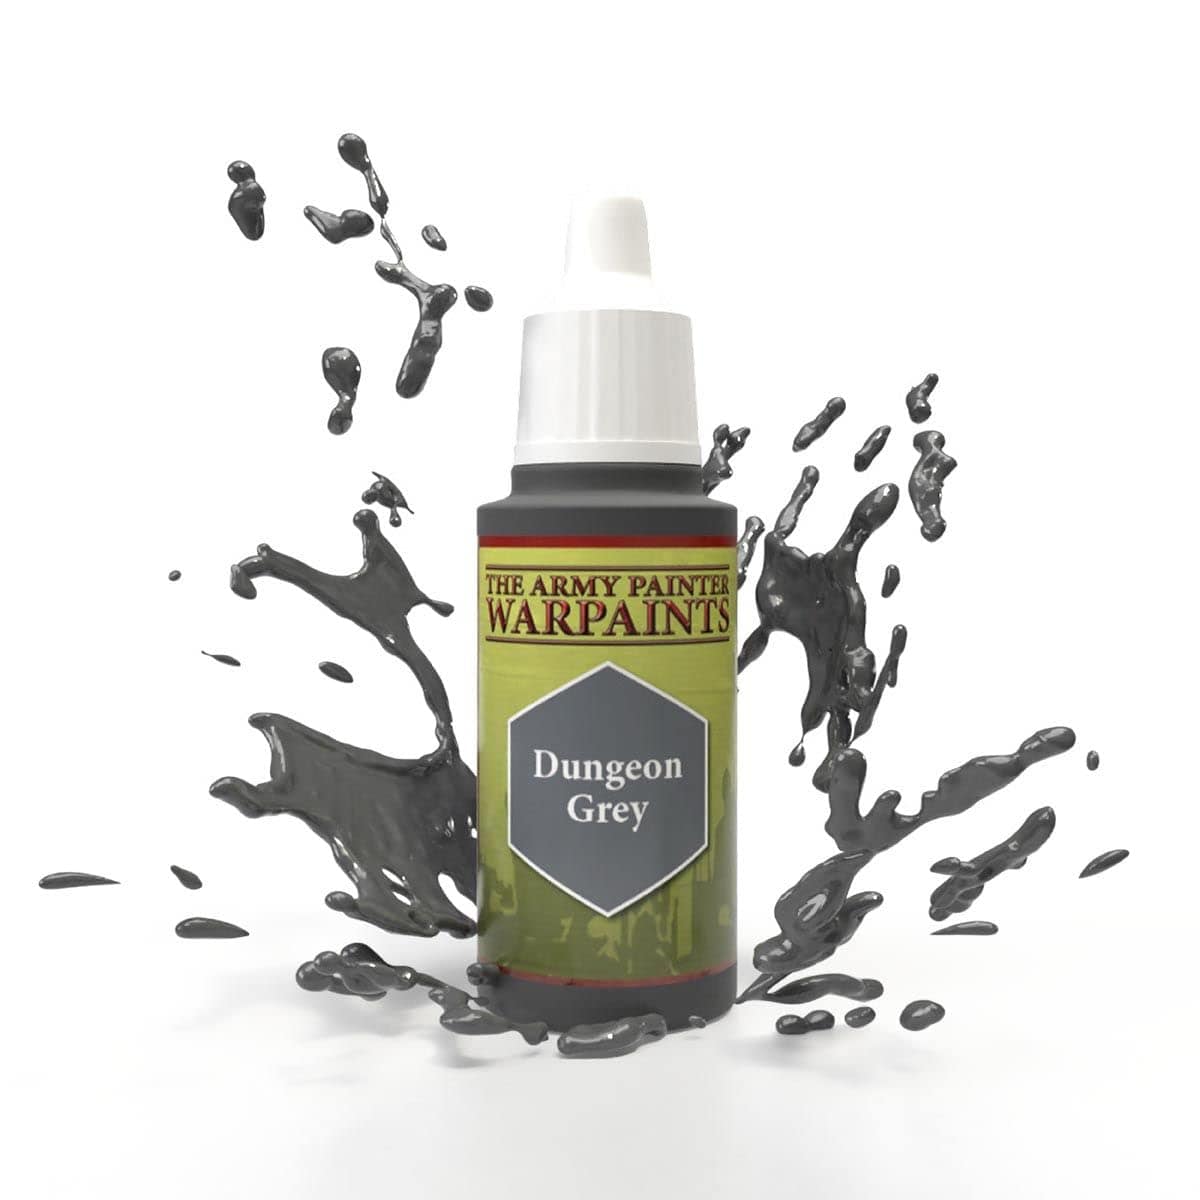 The Army Painter Accessories The Army Painter Warpaints: Dungeon Grey 18ml